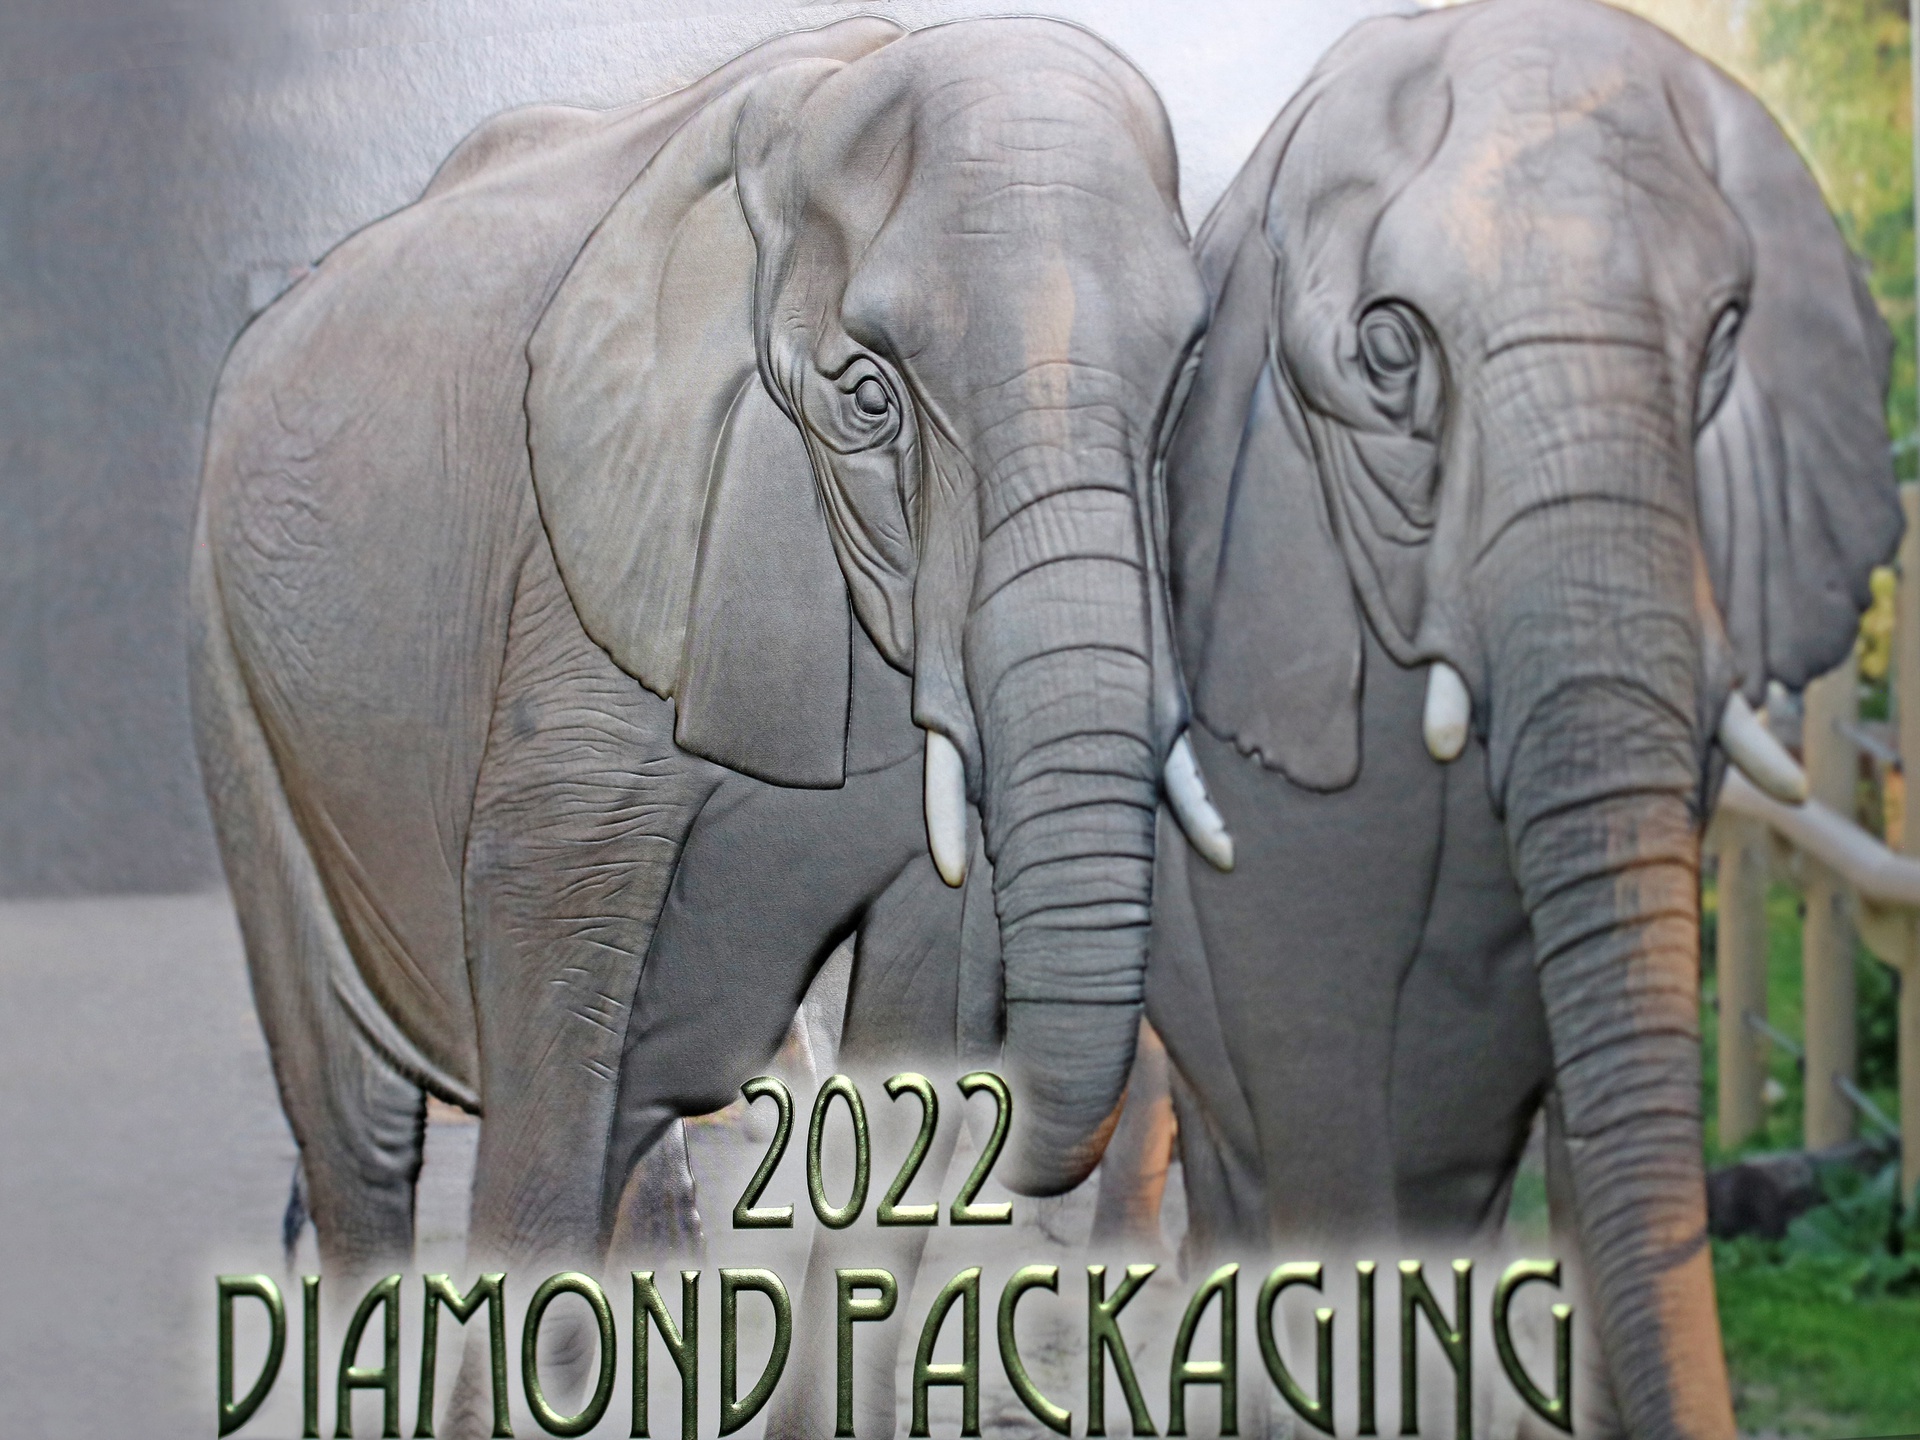 Cold foil delivers shimmering metallic effects on the 2022 and Diamond Packaging text in the bottom backer.